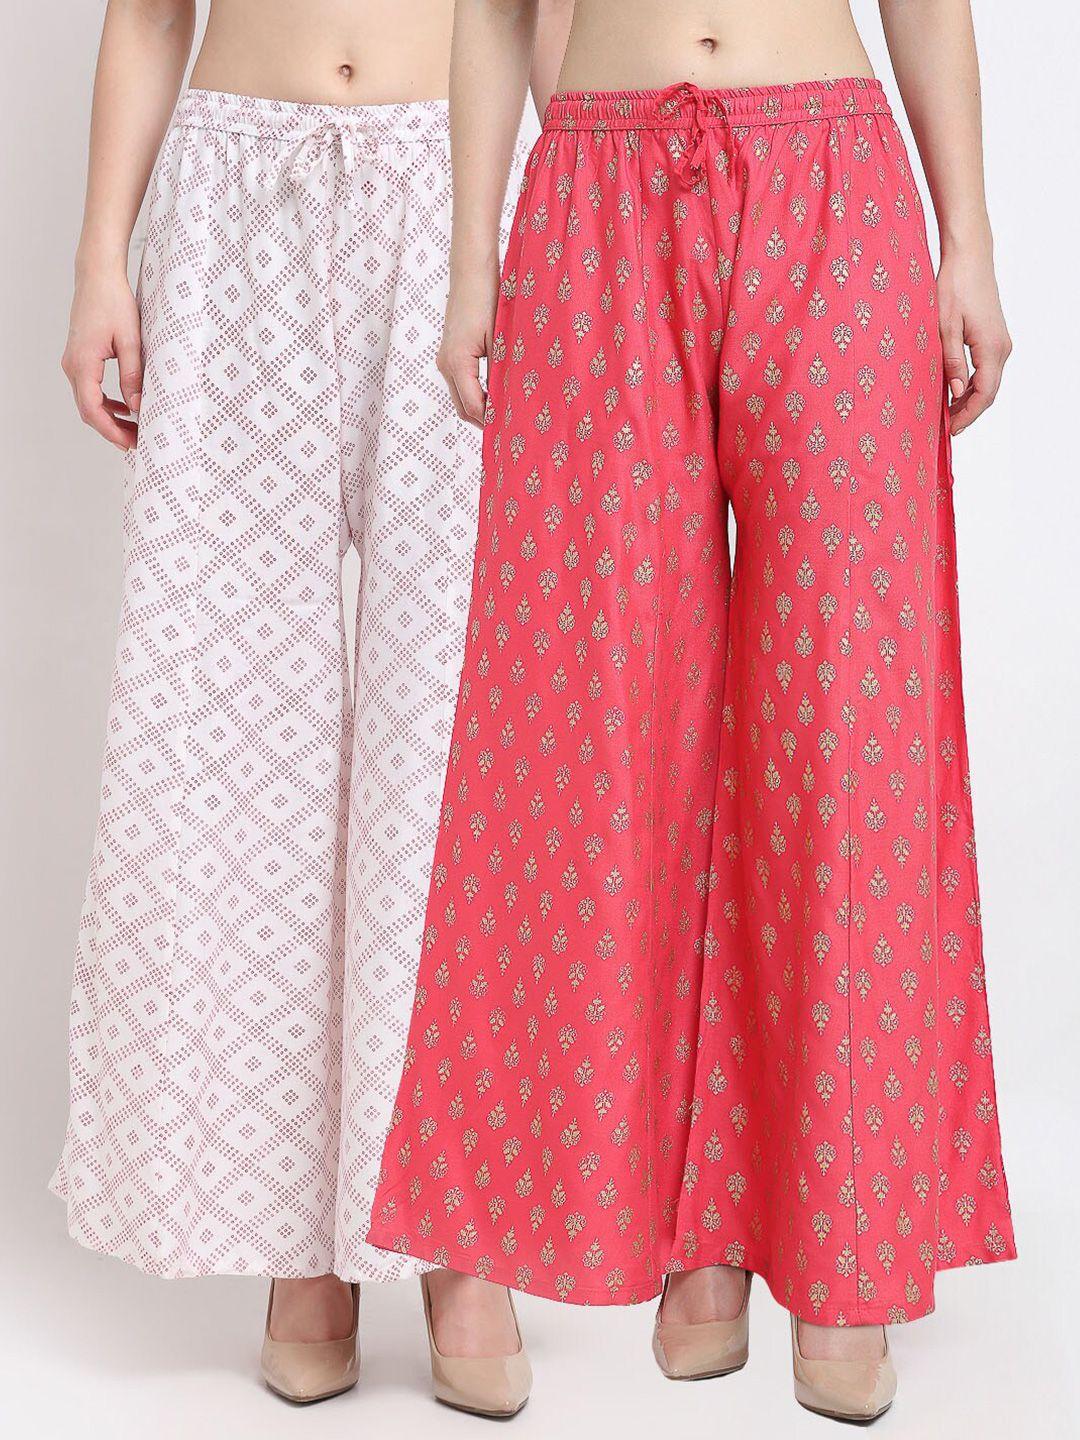 gracit-women-pack-of-2-white-&-pink-ethnic-motifs-printed-knitted-ethnic-palazzos